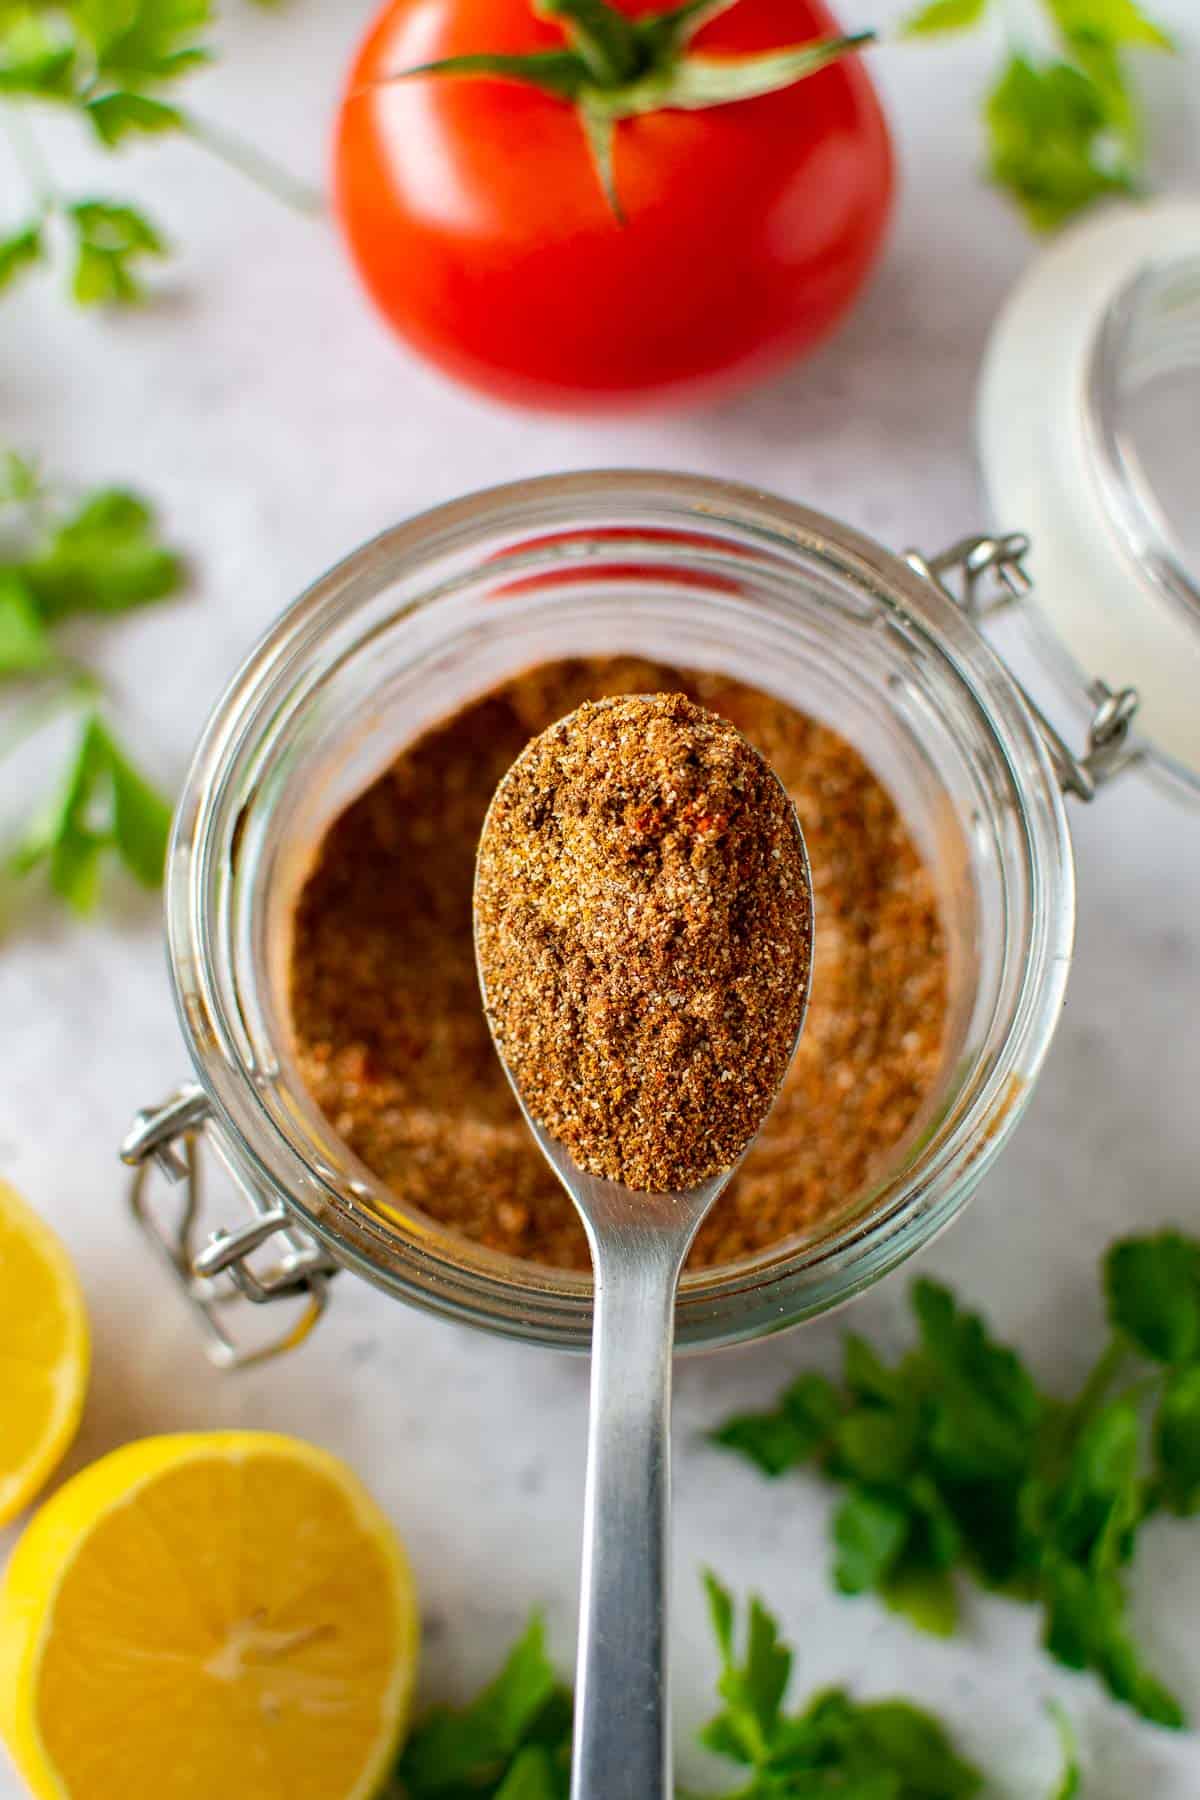 A spoon lifting up shawarma spice mix from a jar.